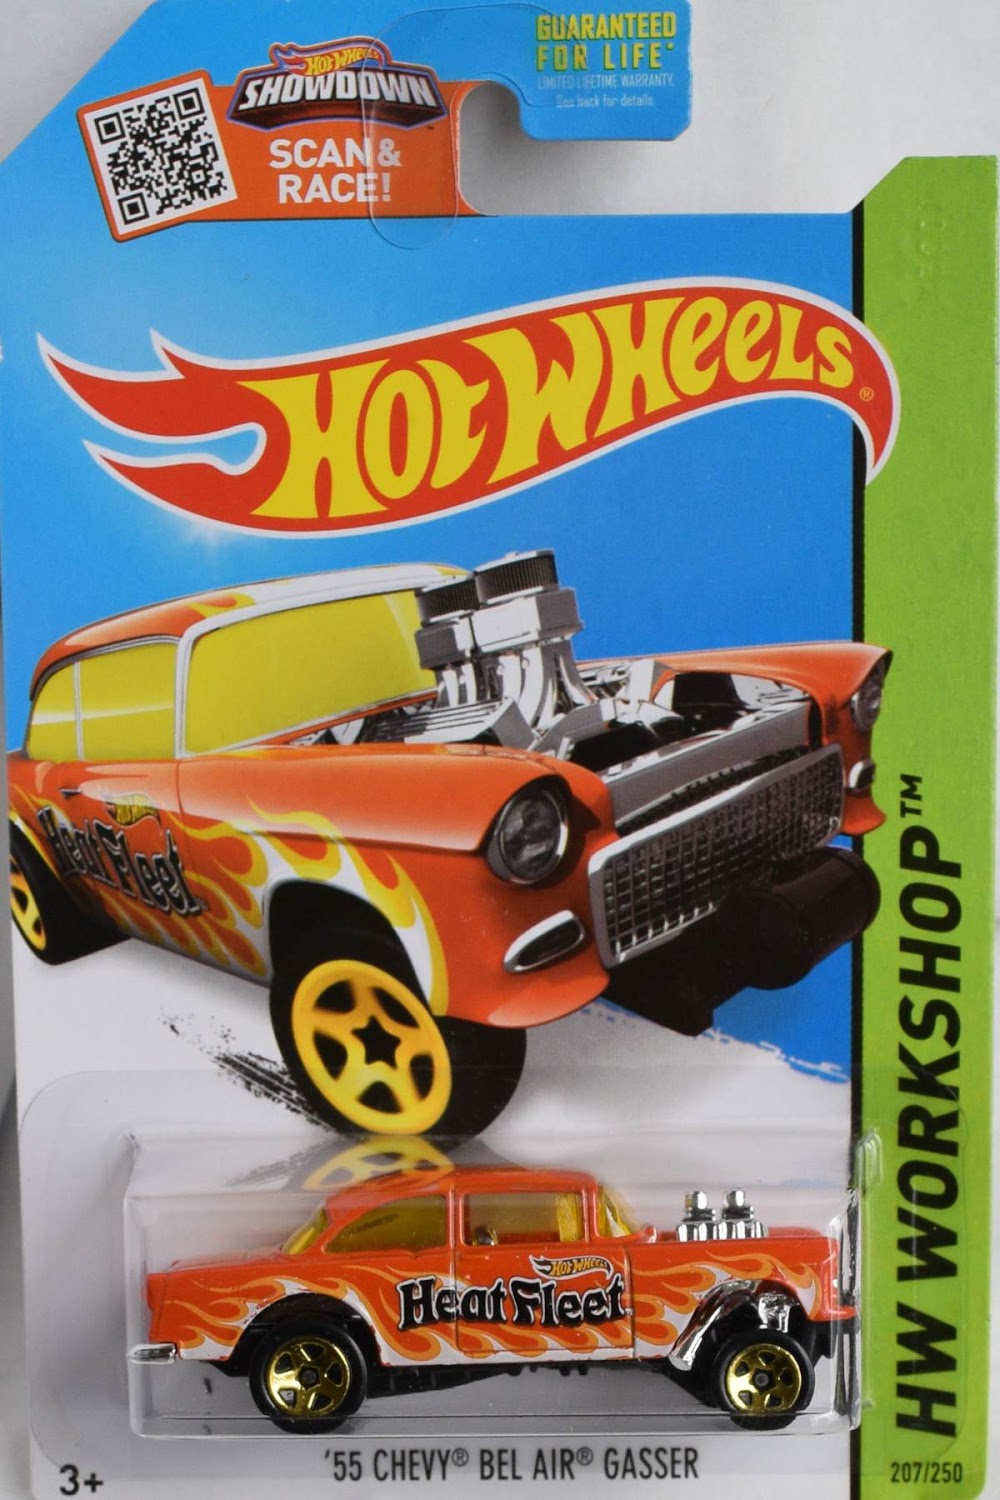 Chevy Bel Air Gasser 55 cover